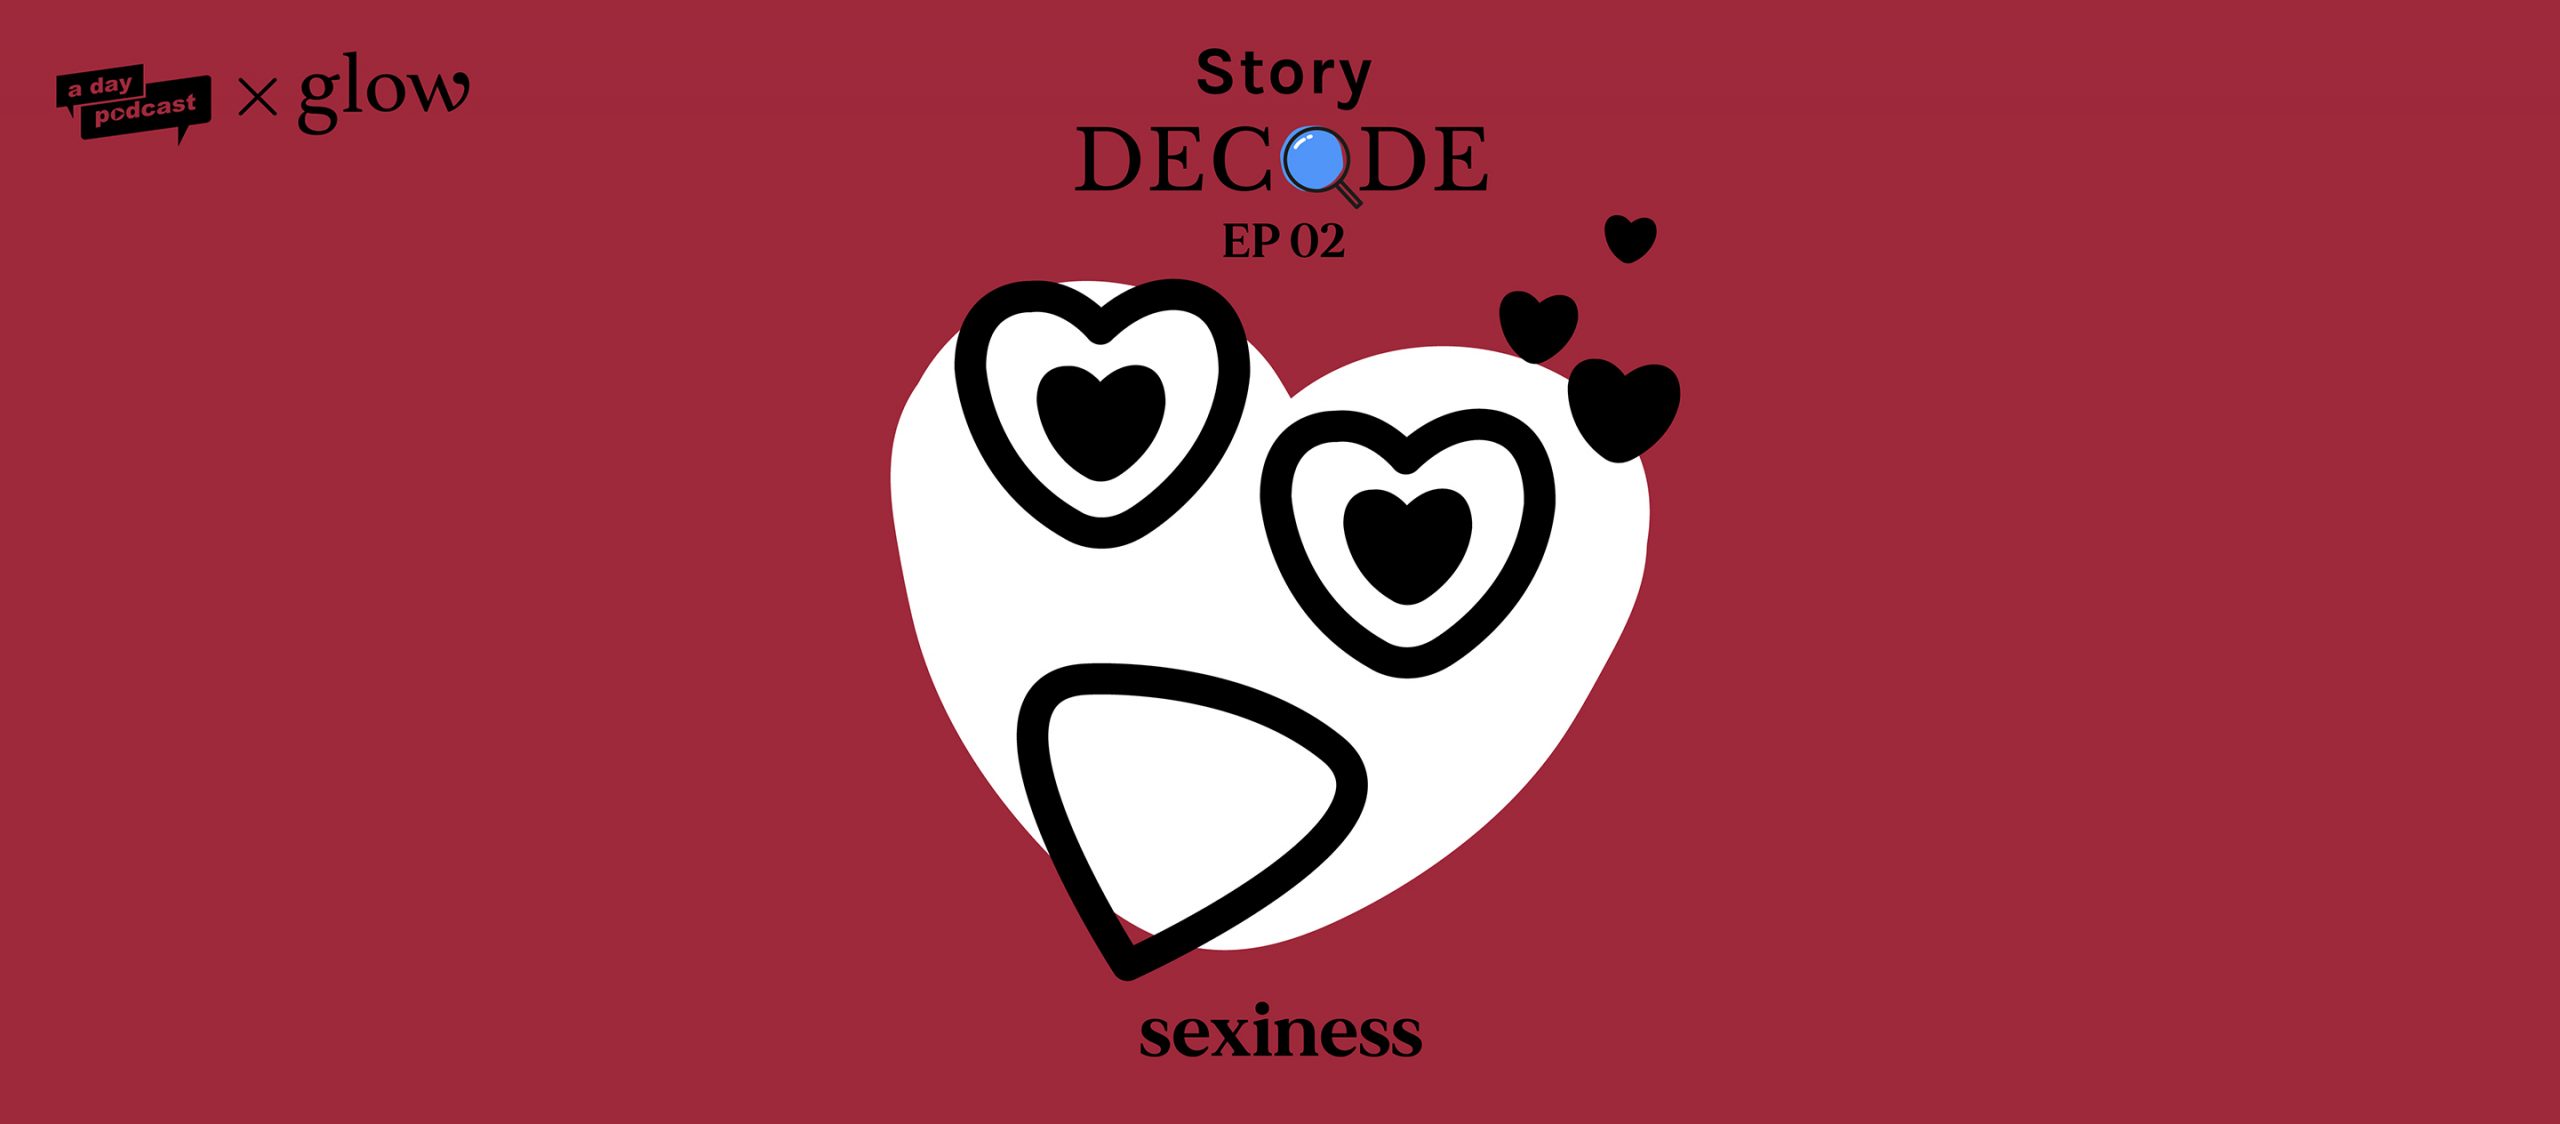 StoryDecode EP.02 : Sexiness (ความเซ็กซี่) | a day Podcast x Glow Story